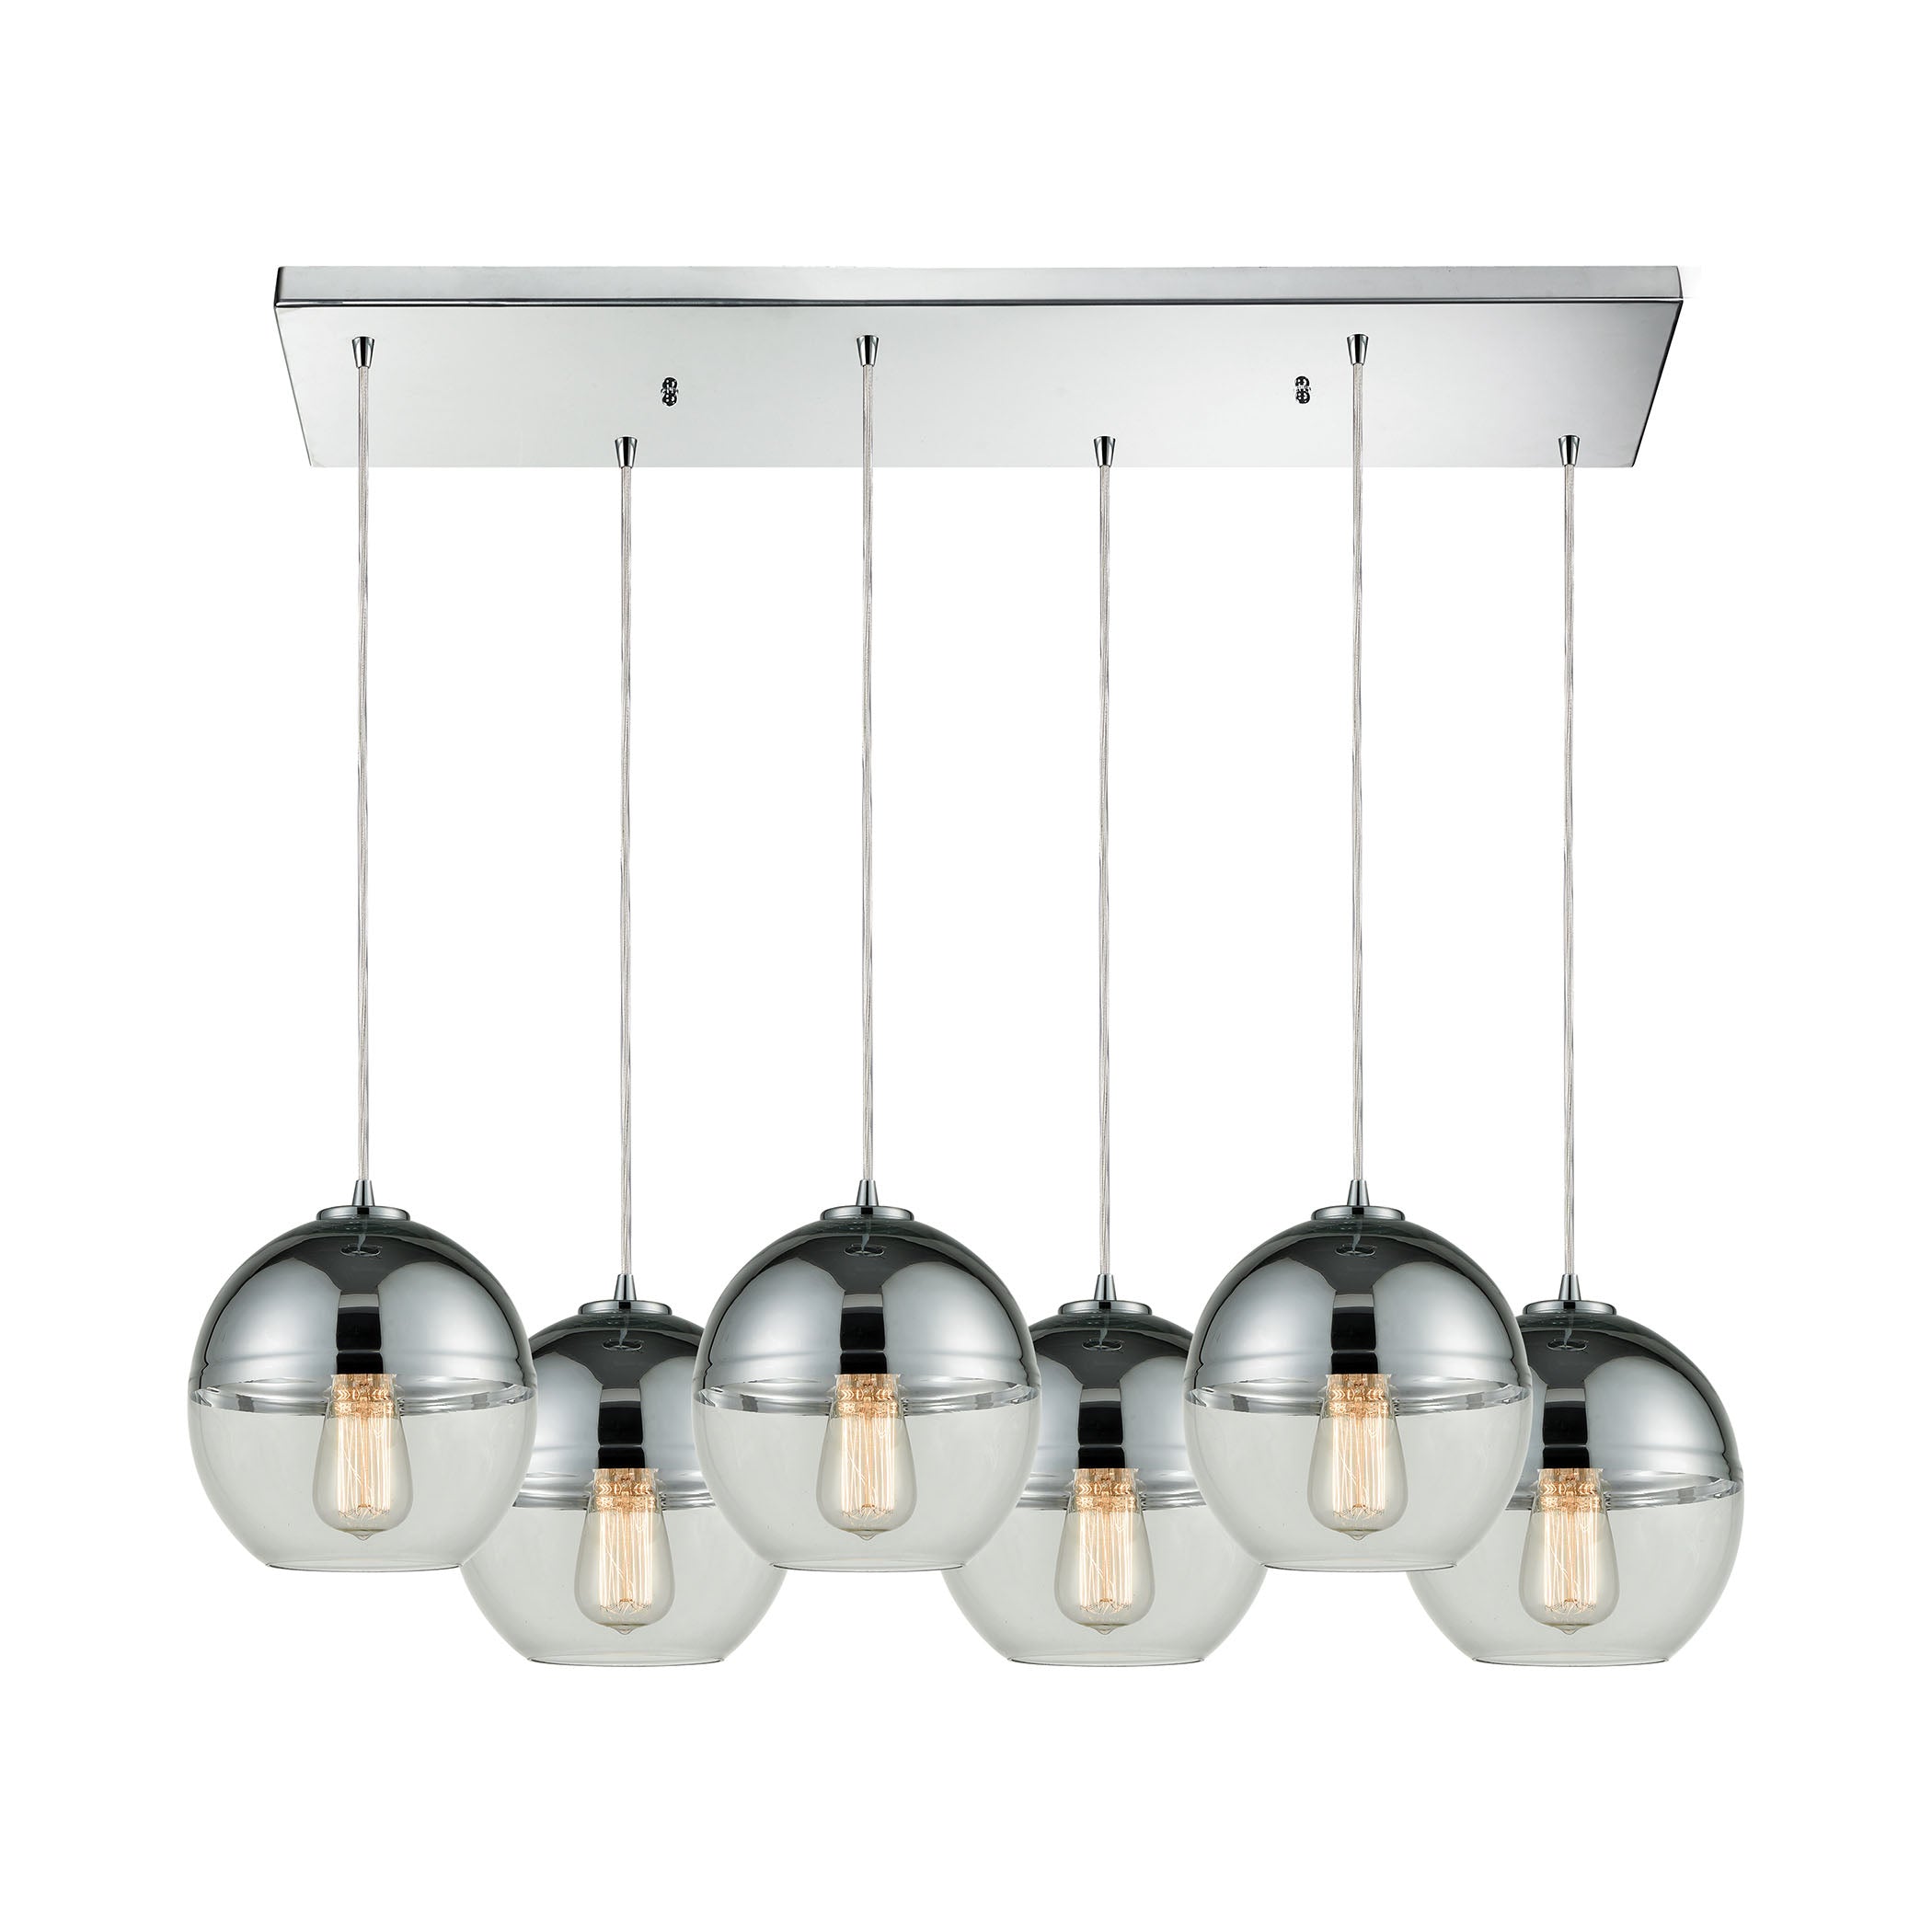 ELK Lighting 10492/6RC Revelo 6-Light Rectangular Pendant Fixture in Polished Chrome with Clear and Chrome-plated Glass